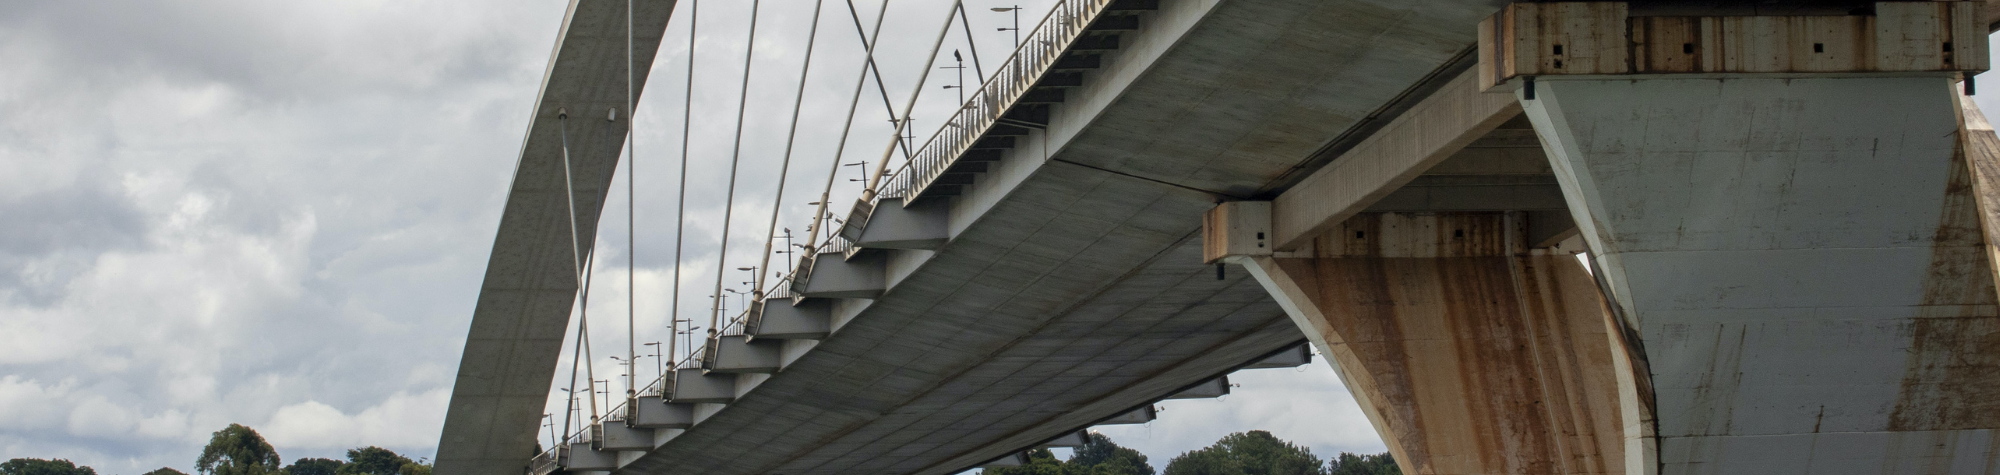 The Problem Of Ageing Concrete In Bridge Structures